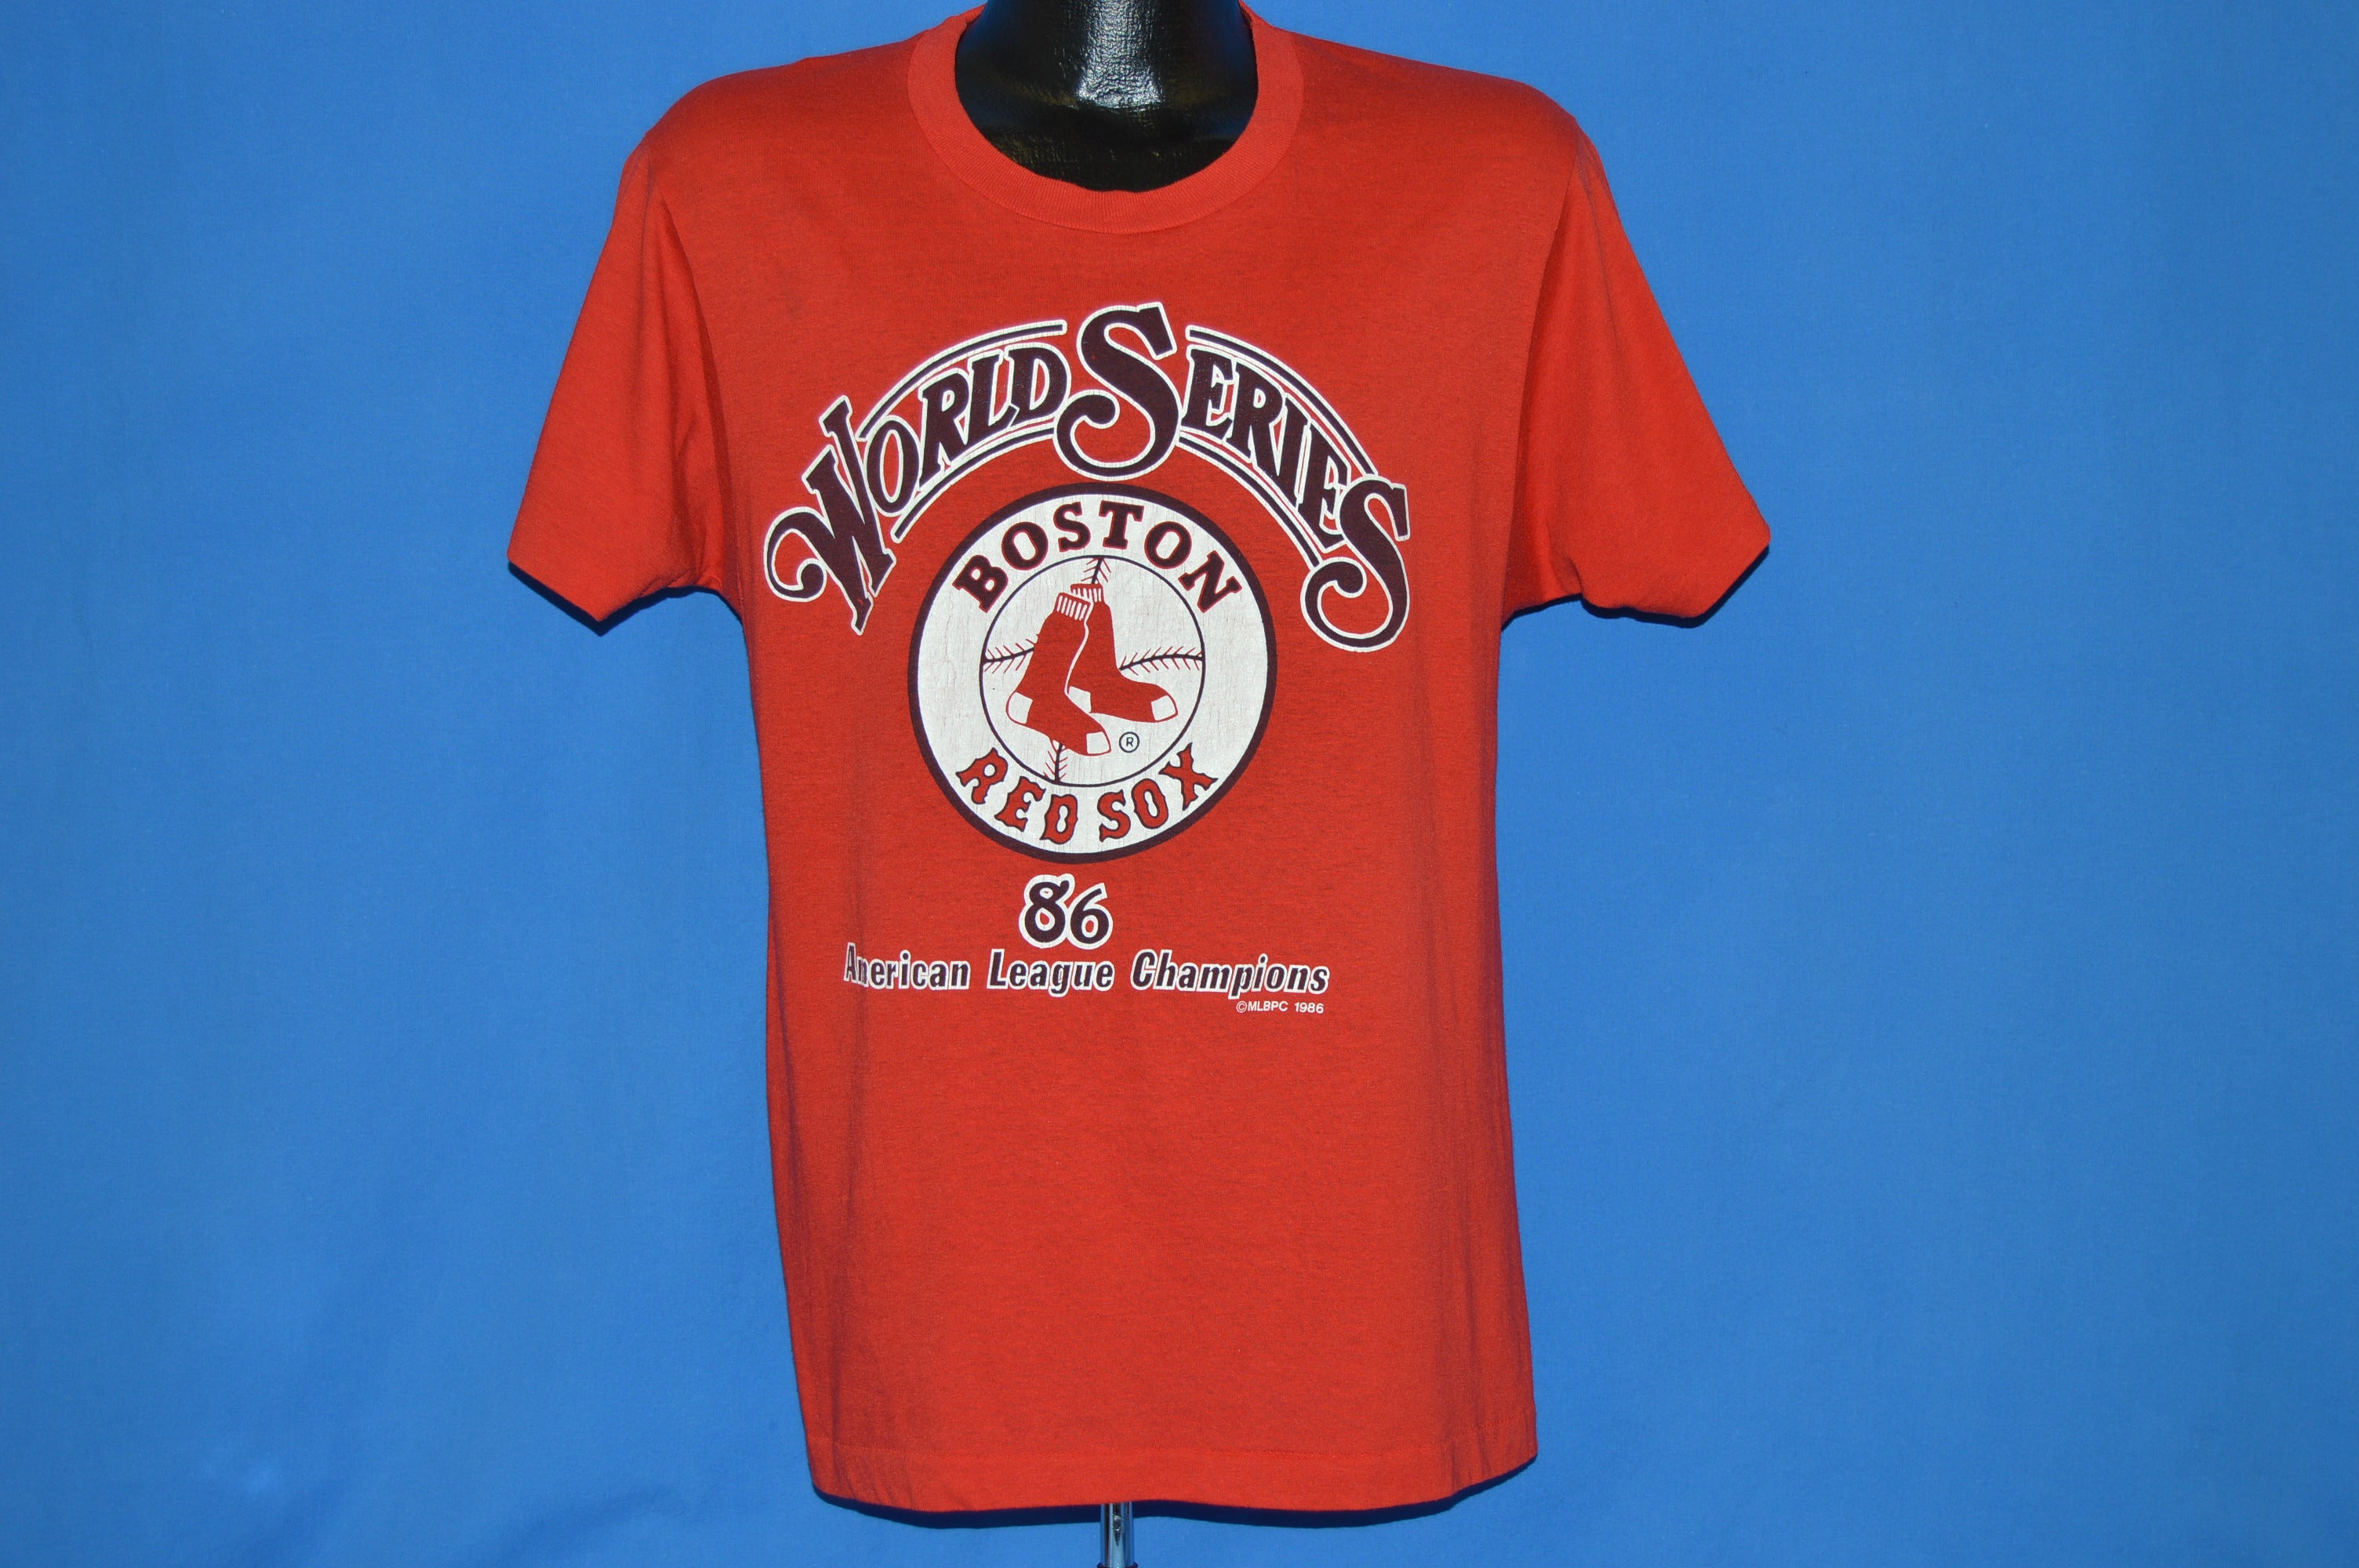 red sox world series champion gear